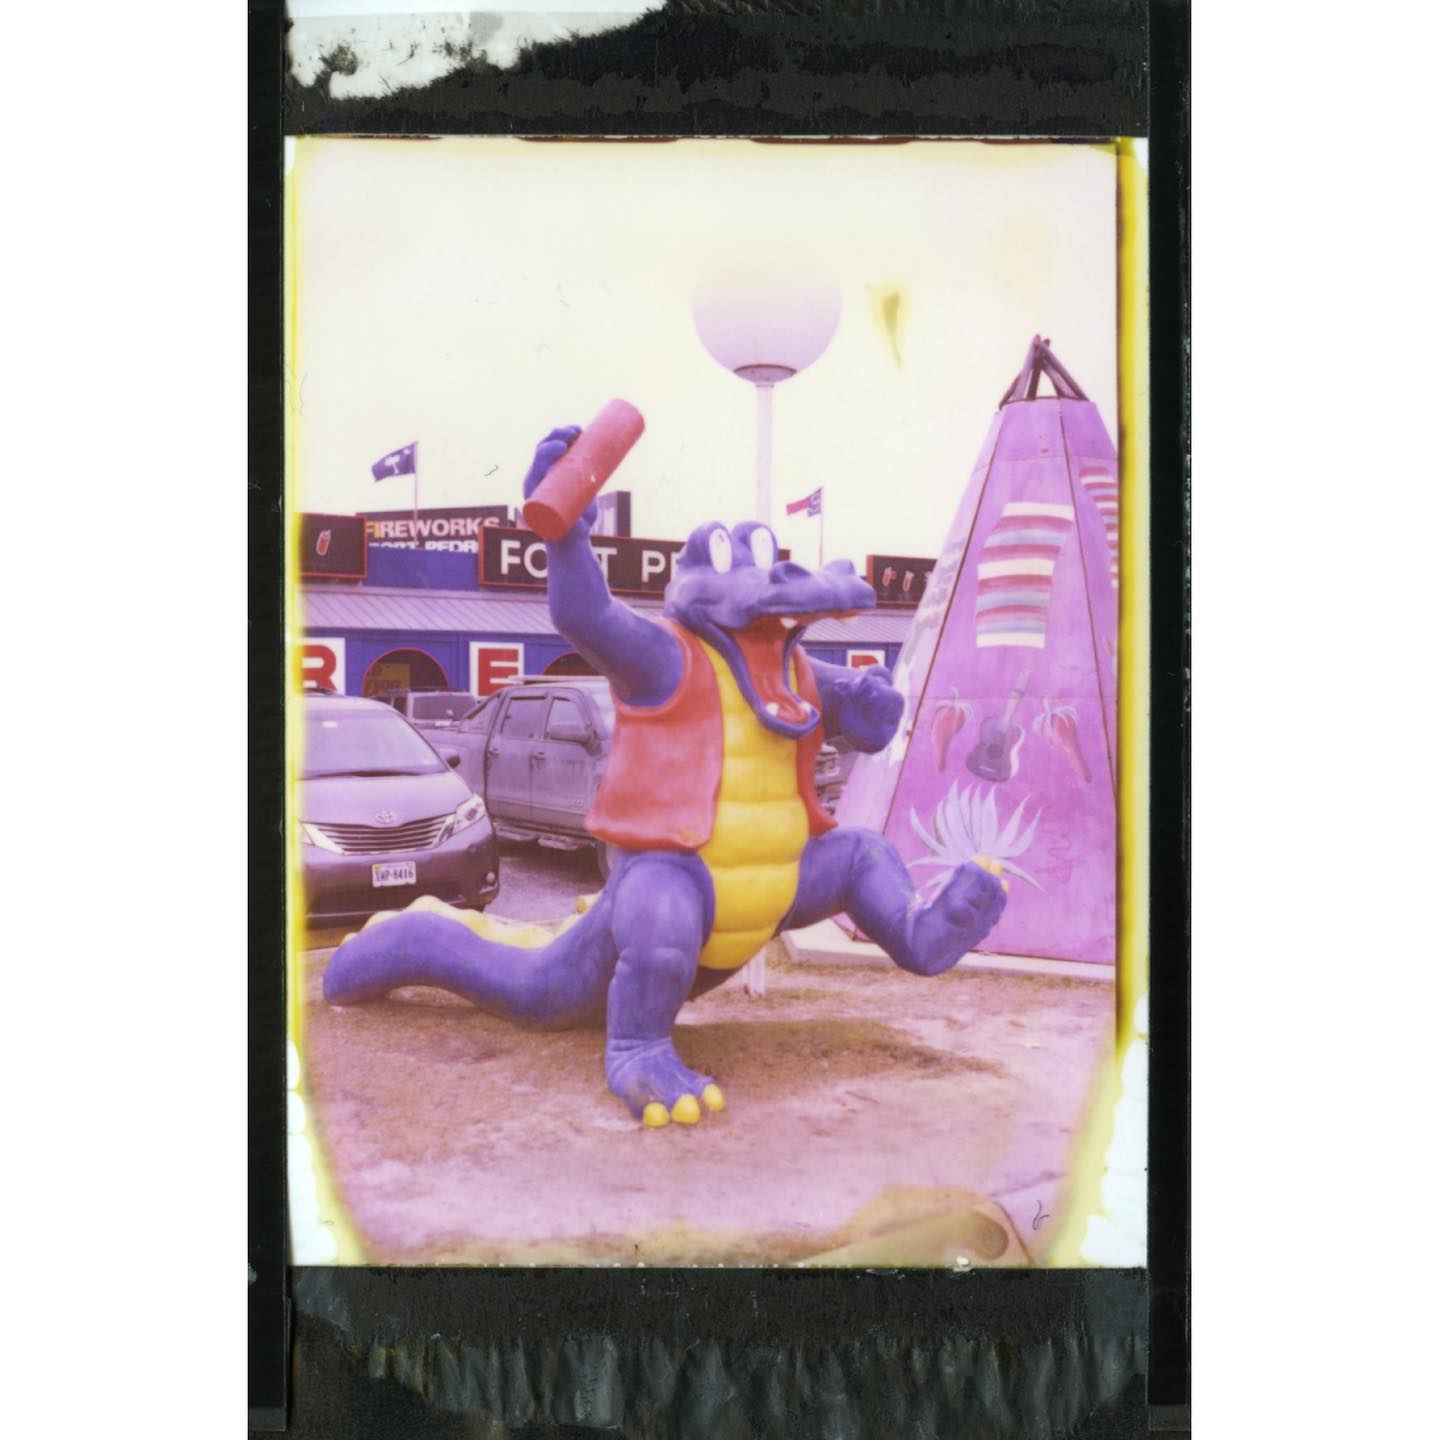 Boom!

Nothing says âfunâ quite like a blue alligator throwing a stick of dynamite. 
#polaroid #polaroid195 #savepackfilm #supersense #oneinstantfilm #oneinstant #film #filmphotography #filmphotographic